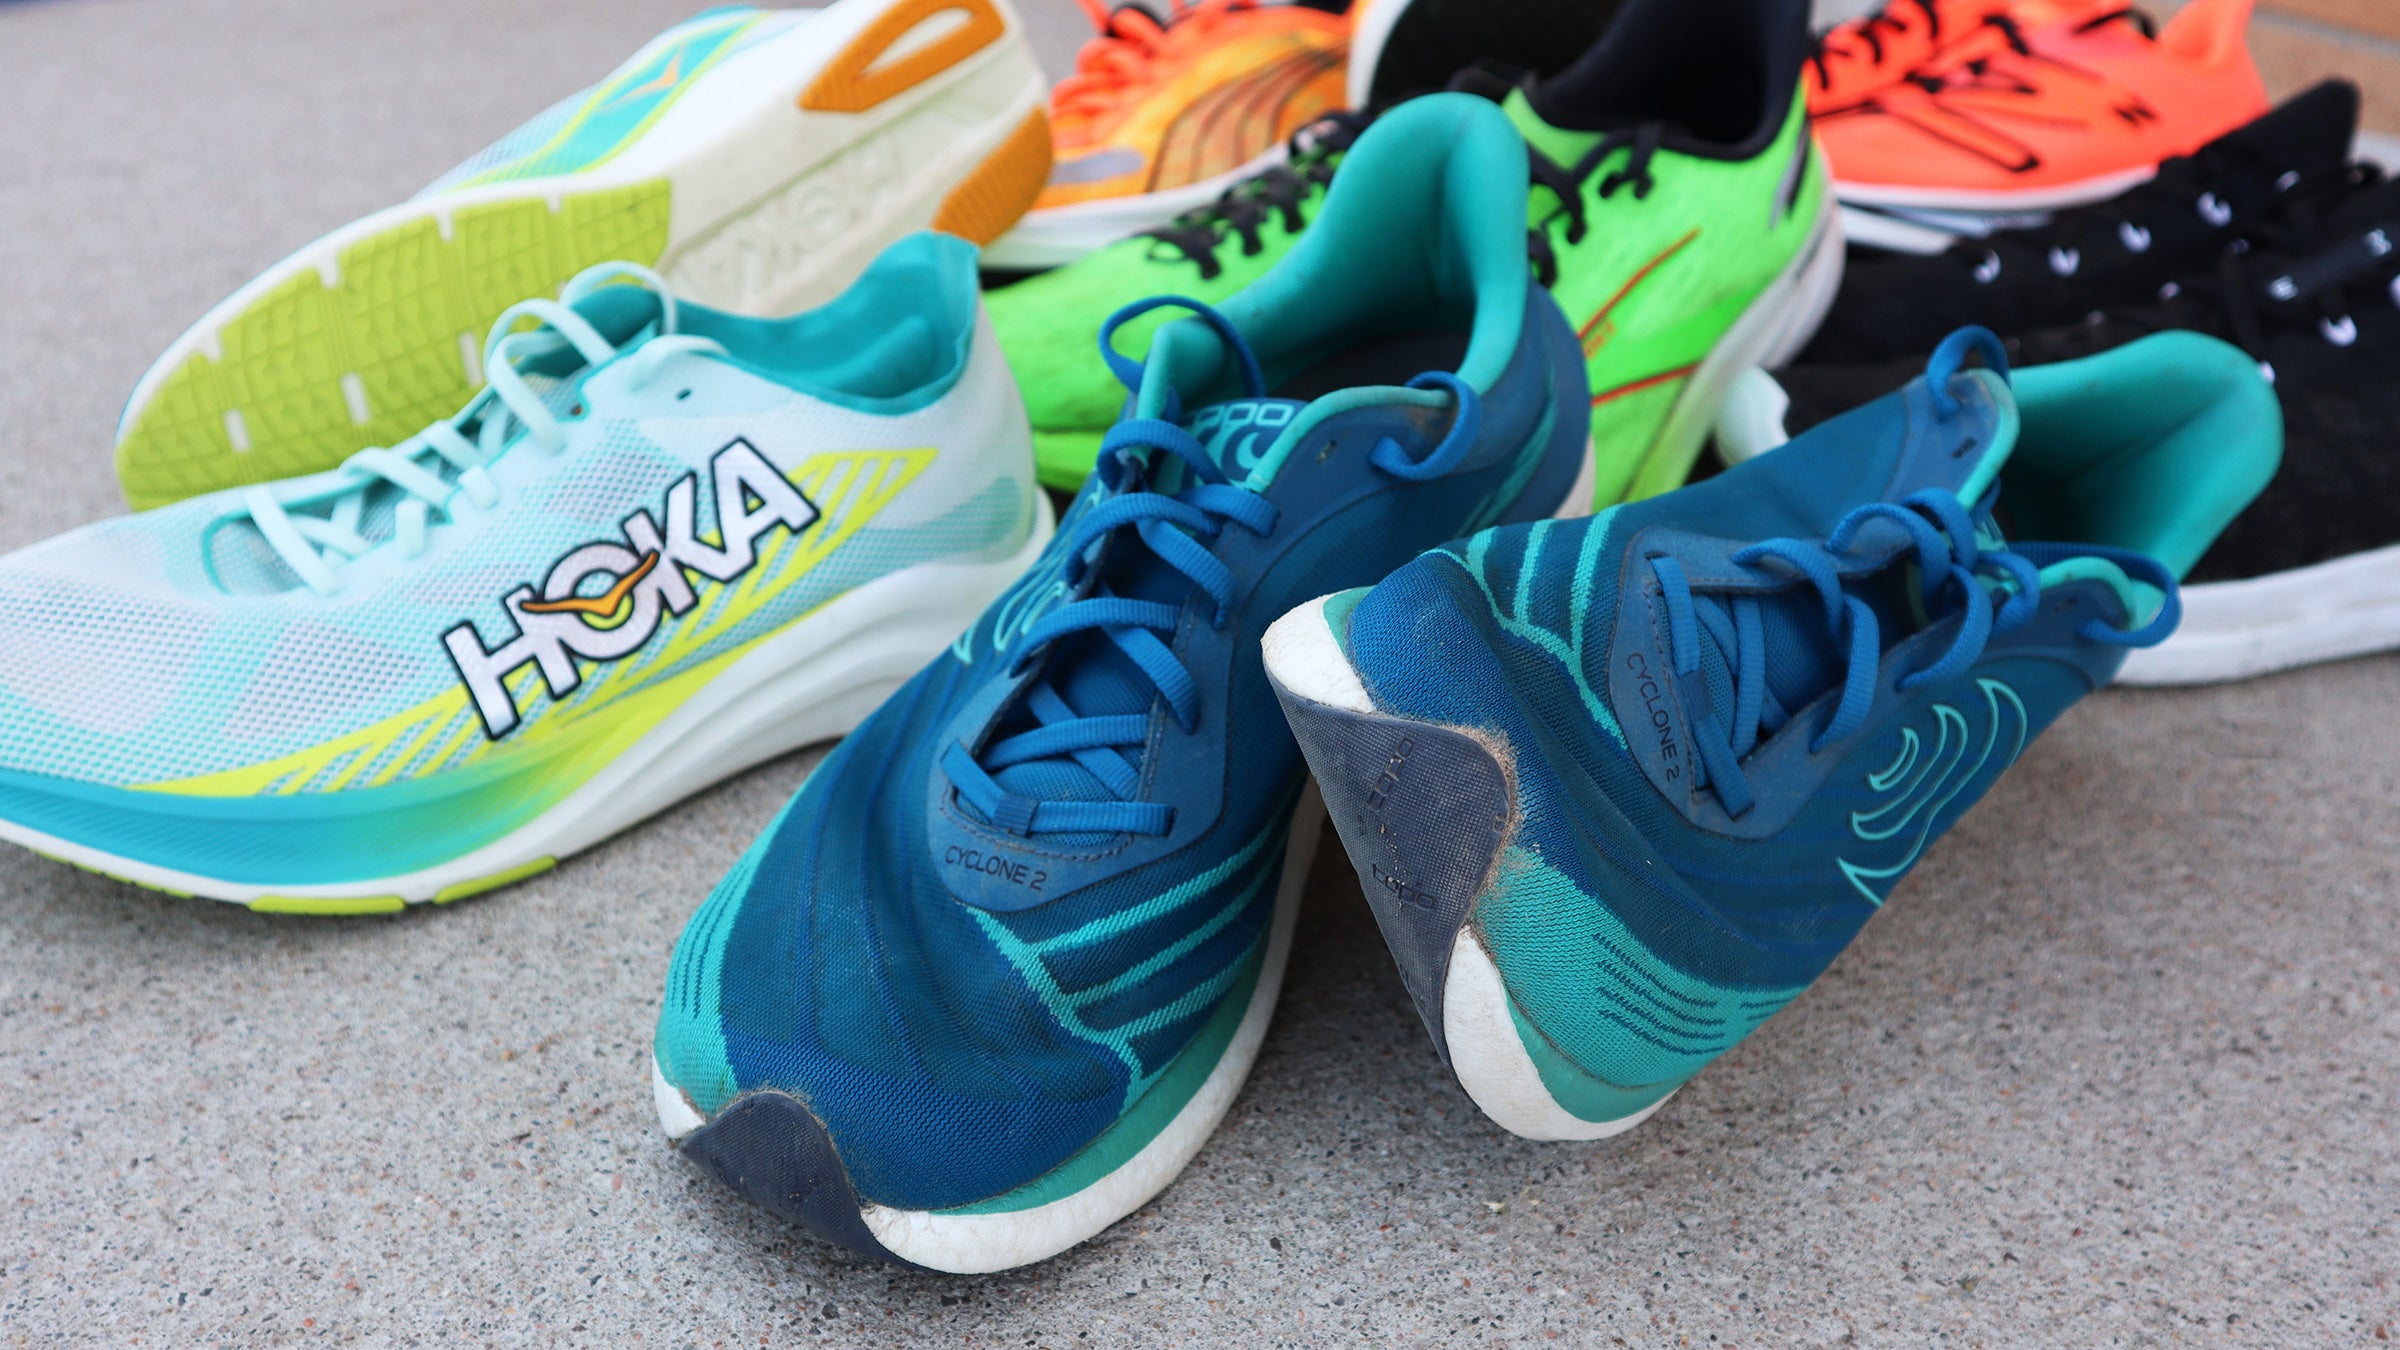 HOKA ONE ONE, Running Shoes, Injury Prevention